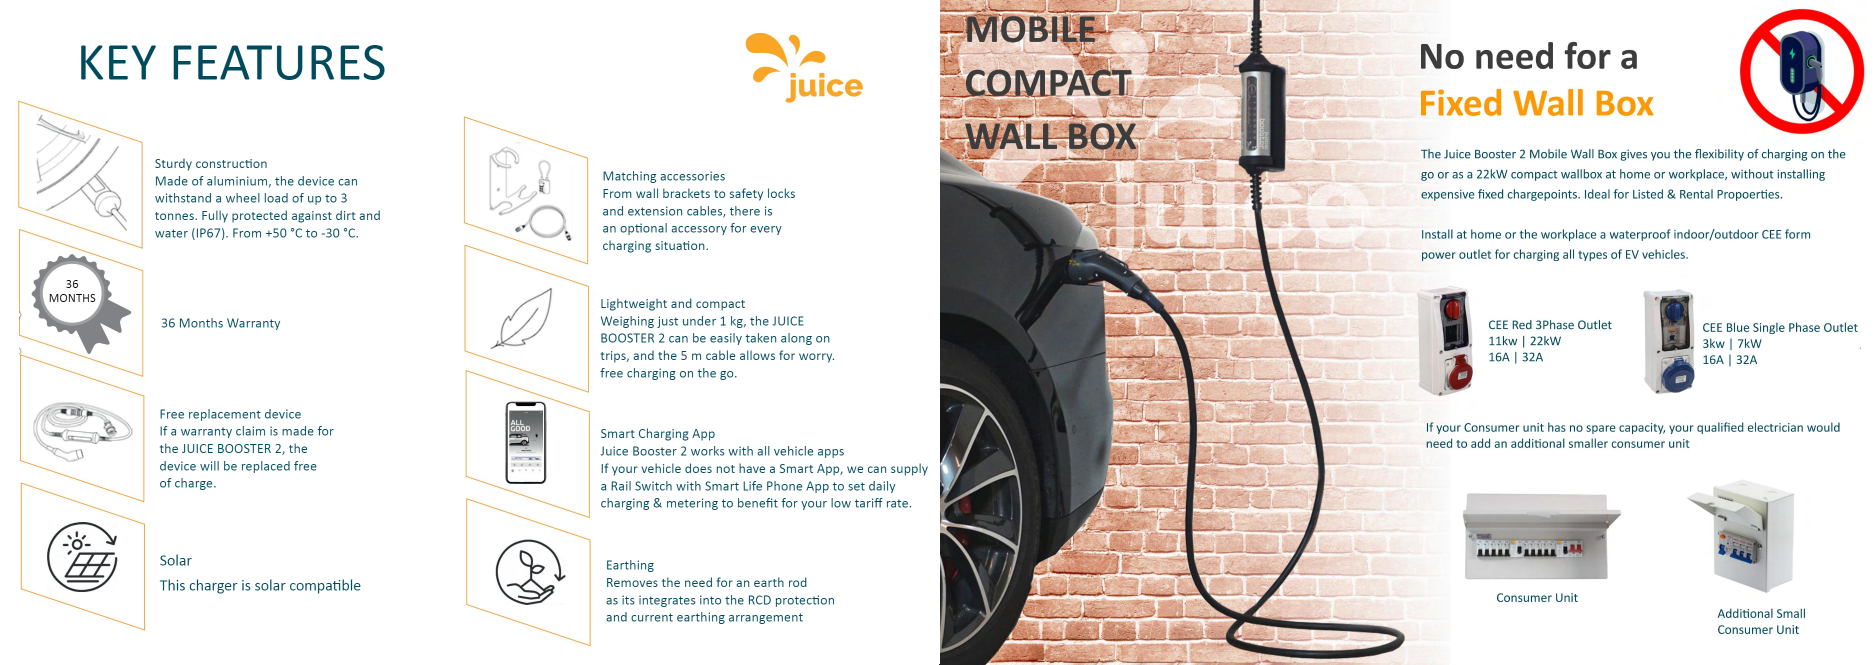 Juice Booster 2, 7kW to 22kW 3Phase Mobile Compact Wall Box